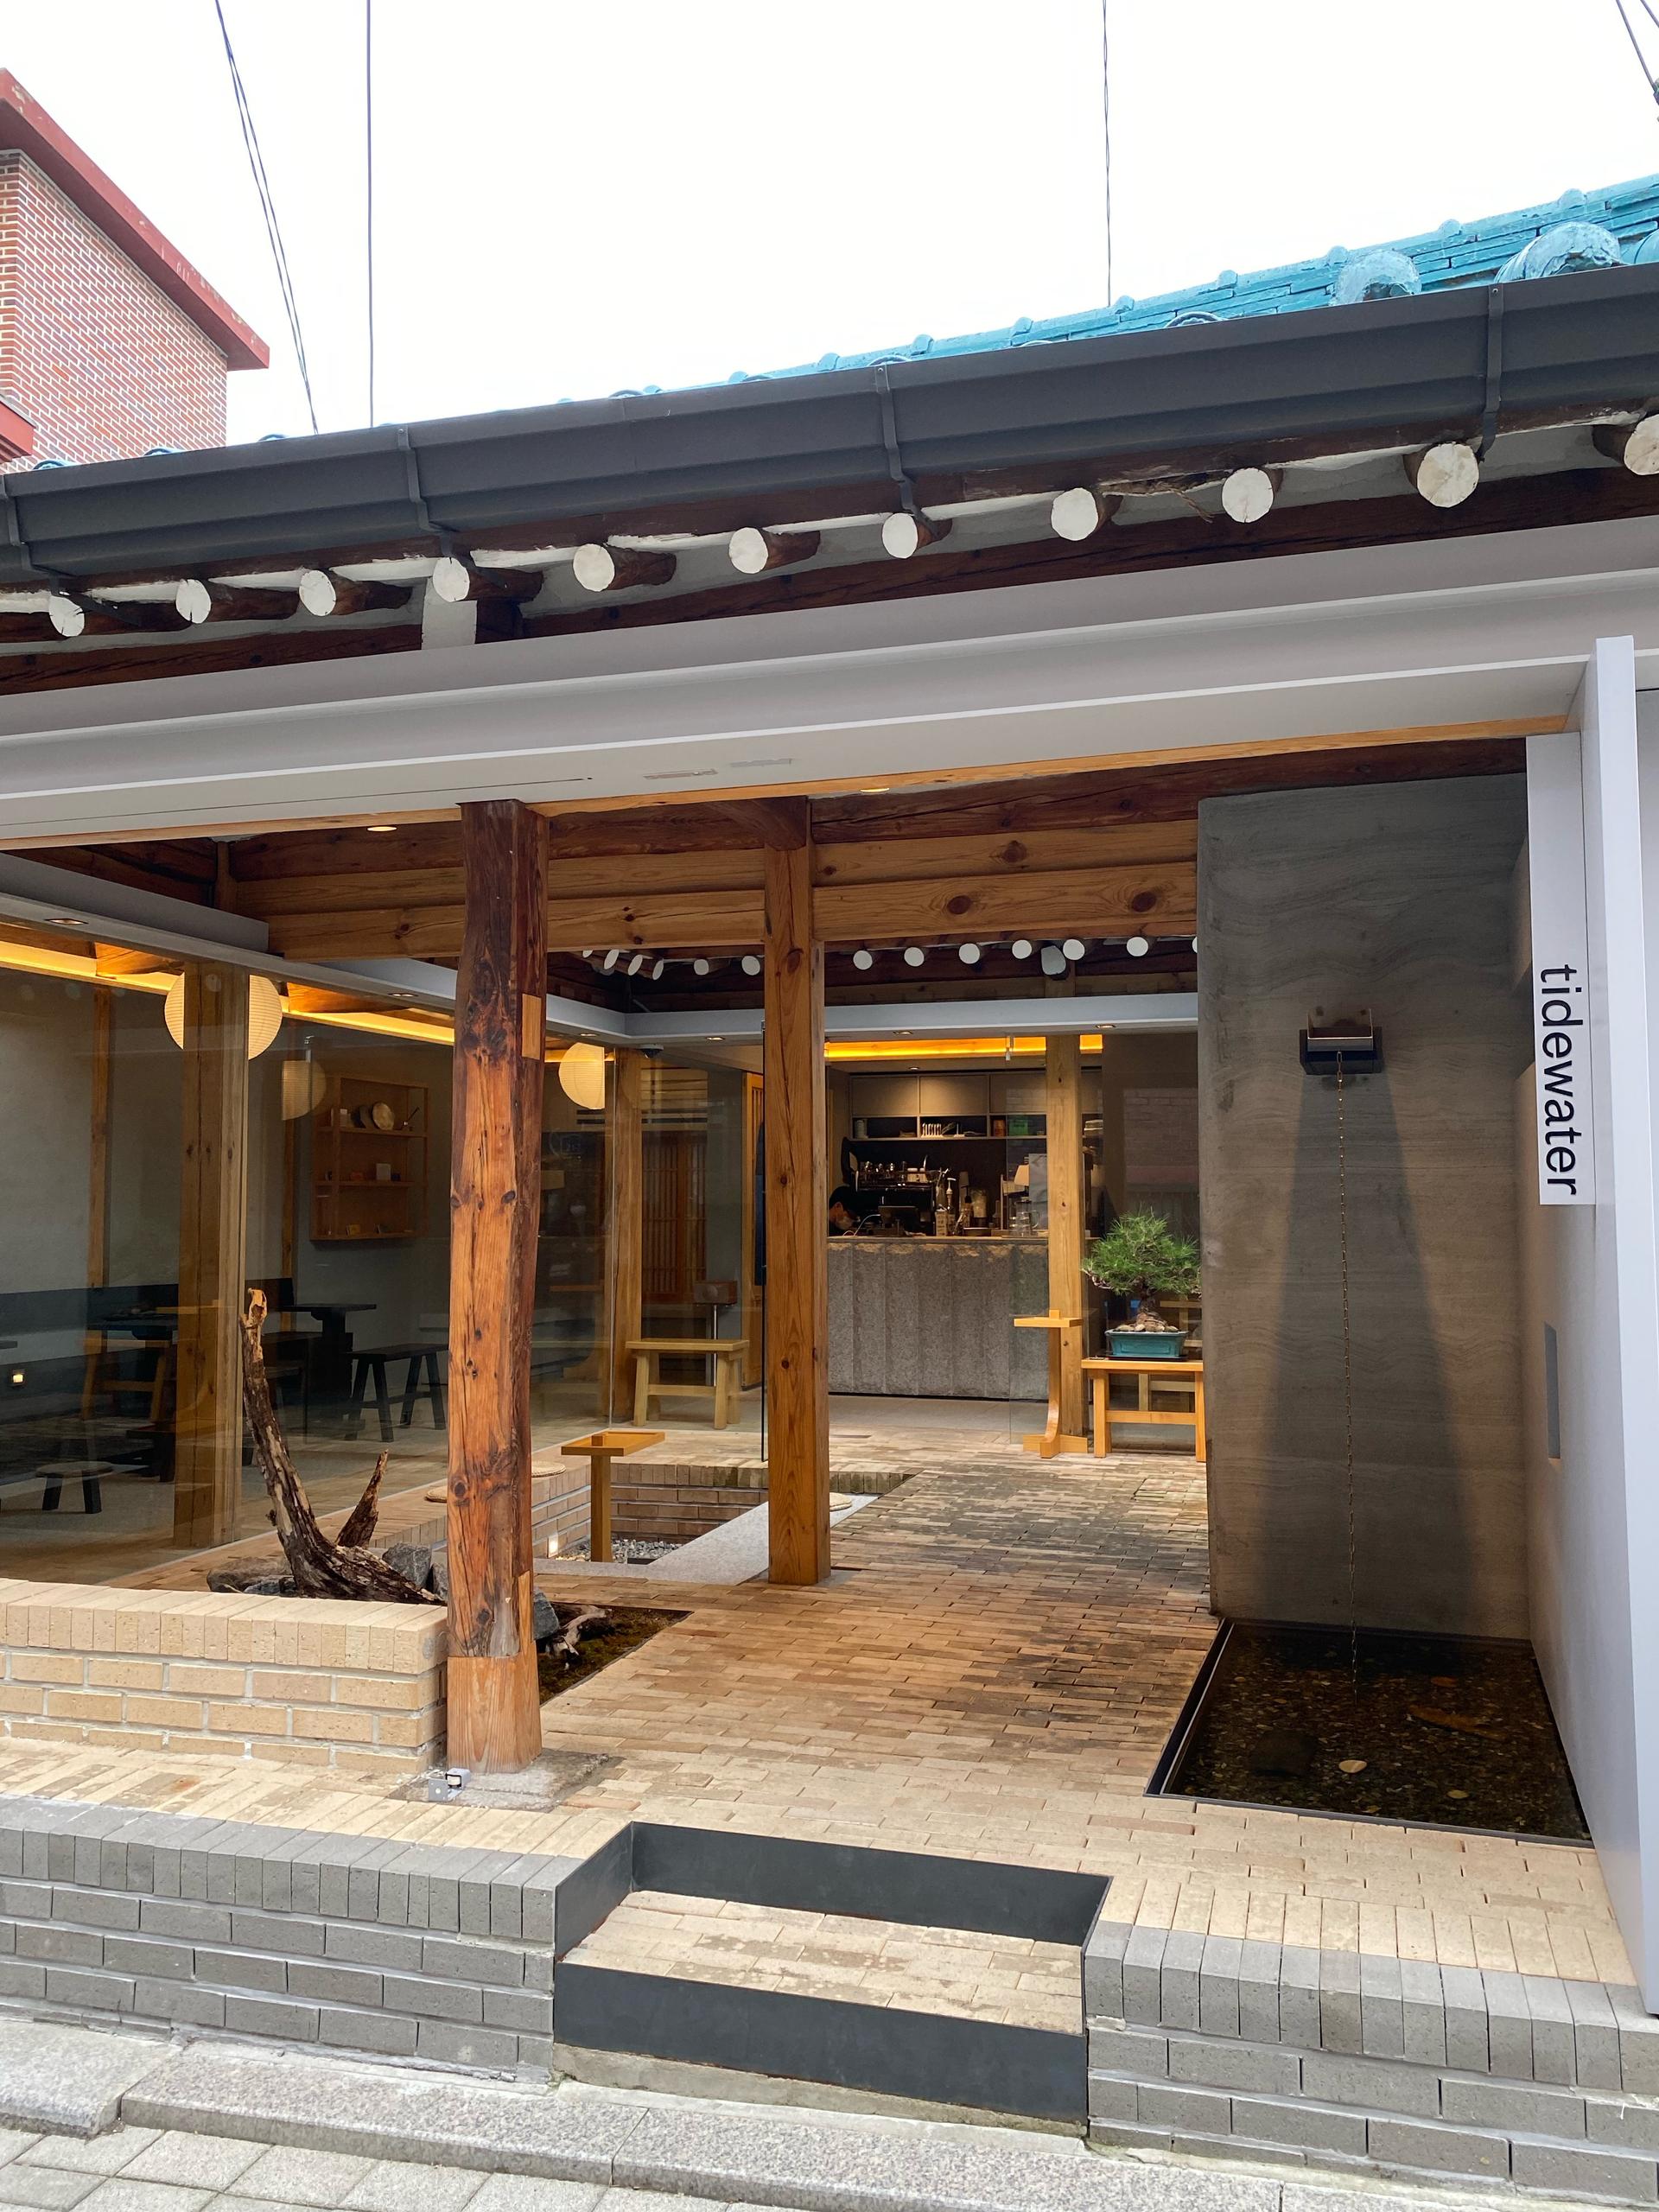 Hidden in the alleys of Seoul's Seochon Village, a Korean-style house cafe.